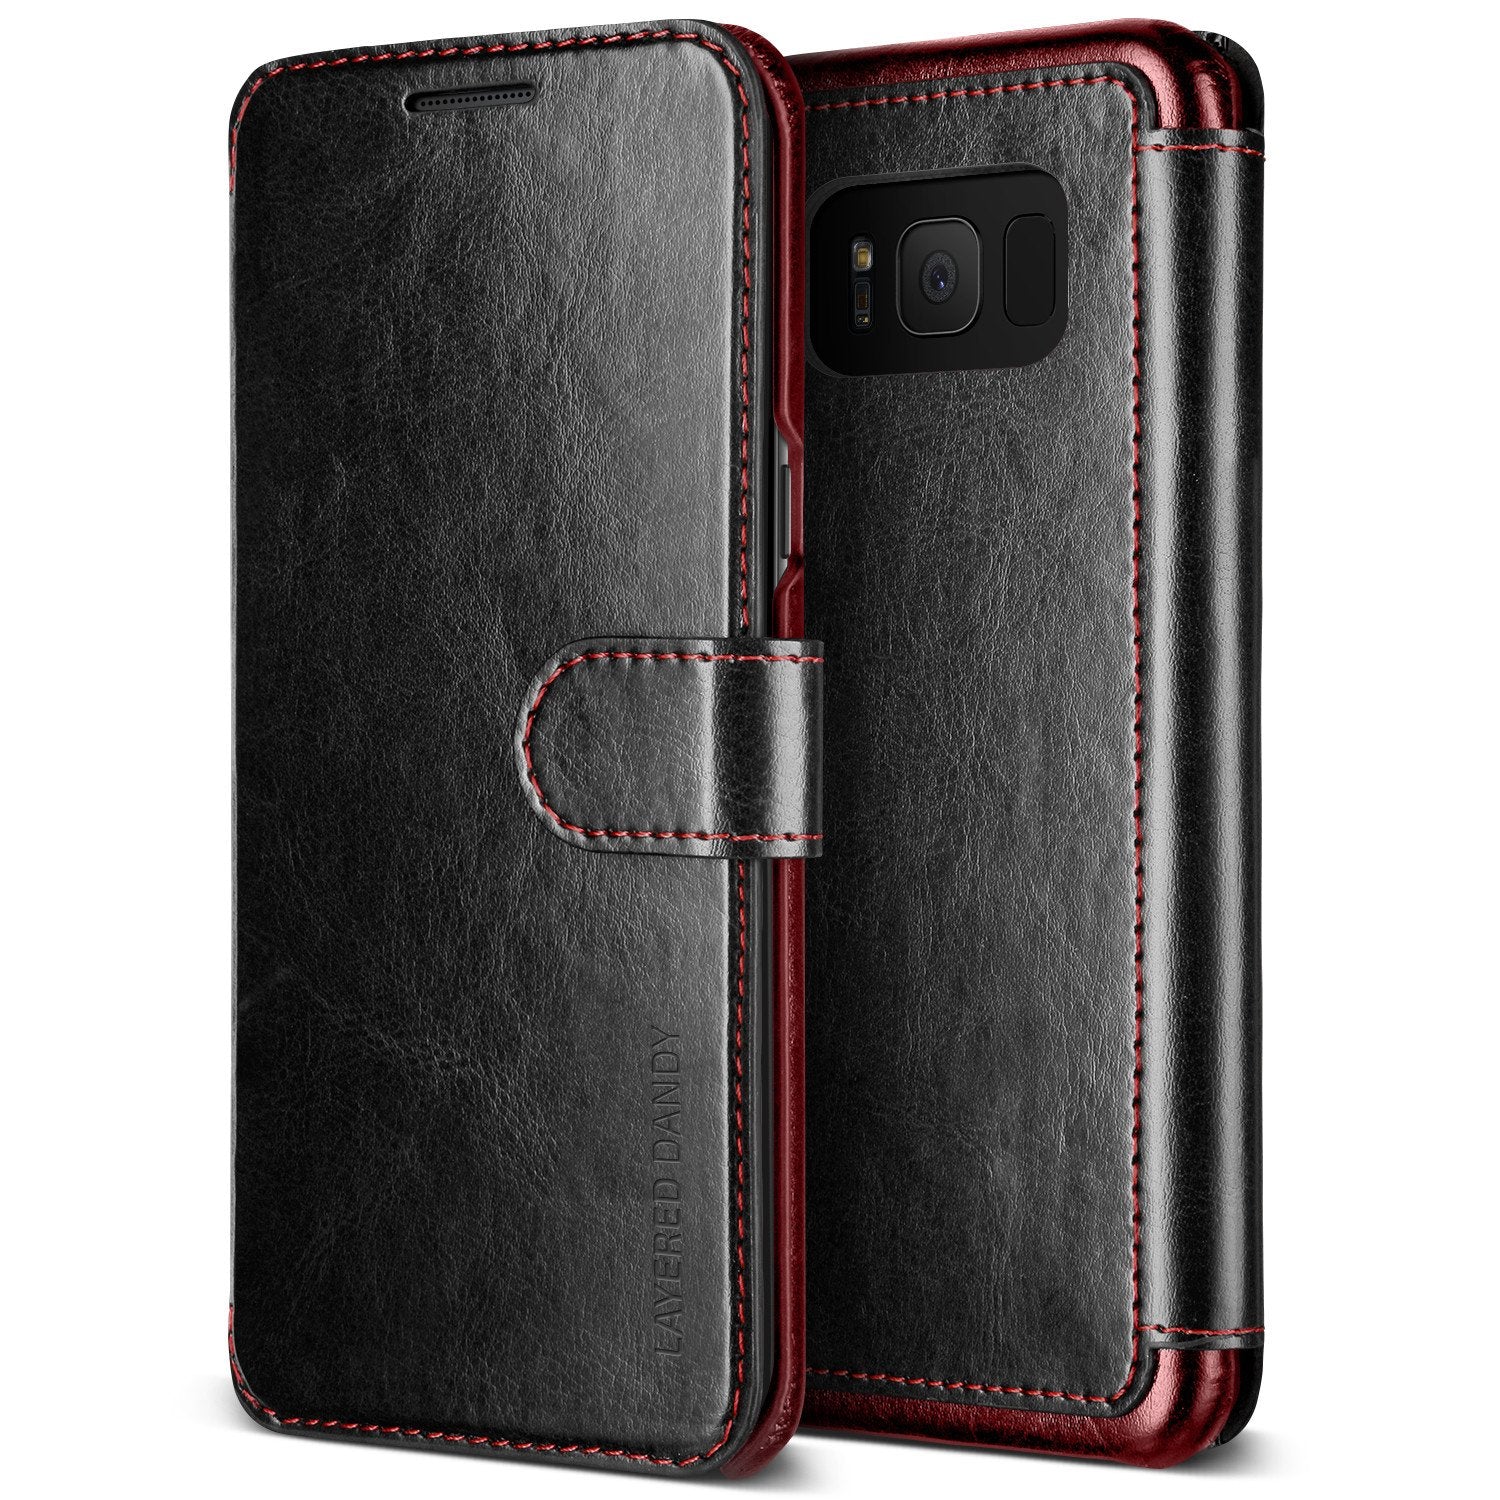 Samsung Galaxy S8 Plus rugged wallet case with multiple durable and convenient card slot with sleek minimalist look by VRS